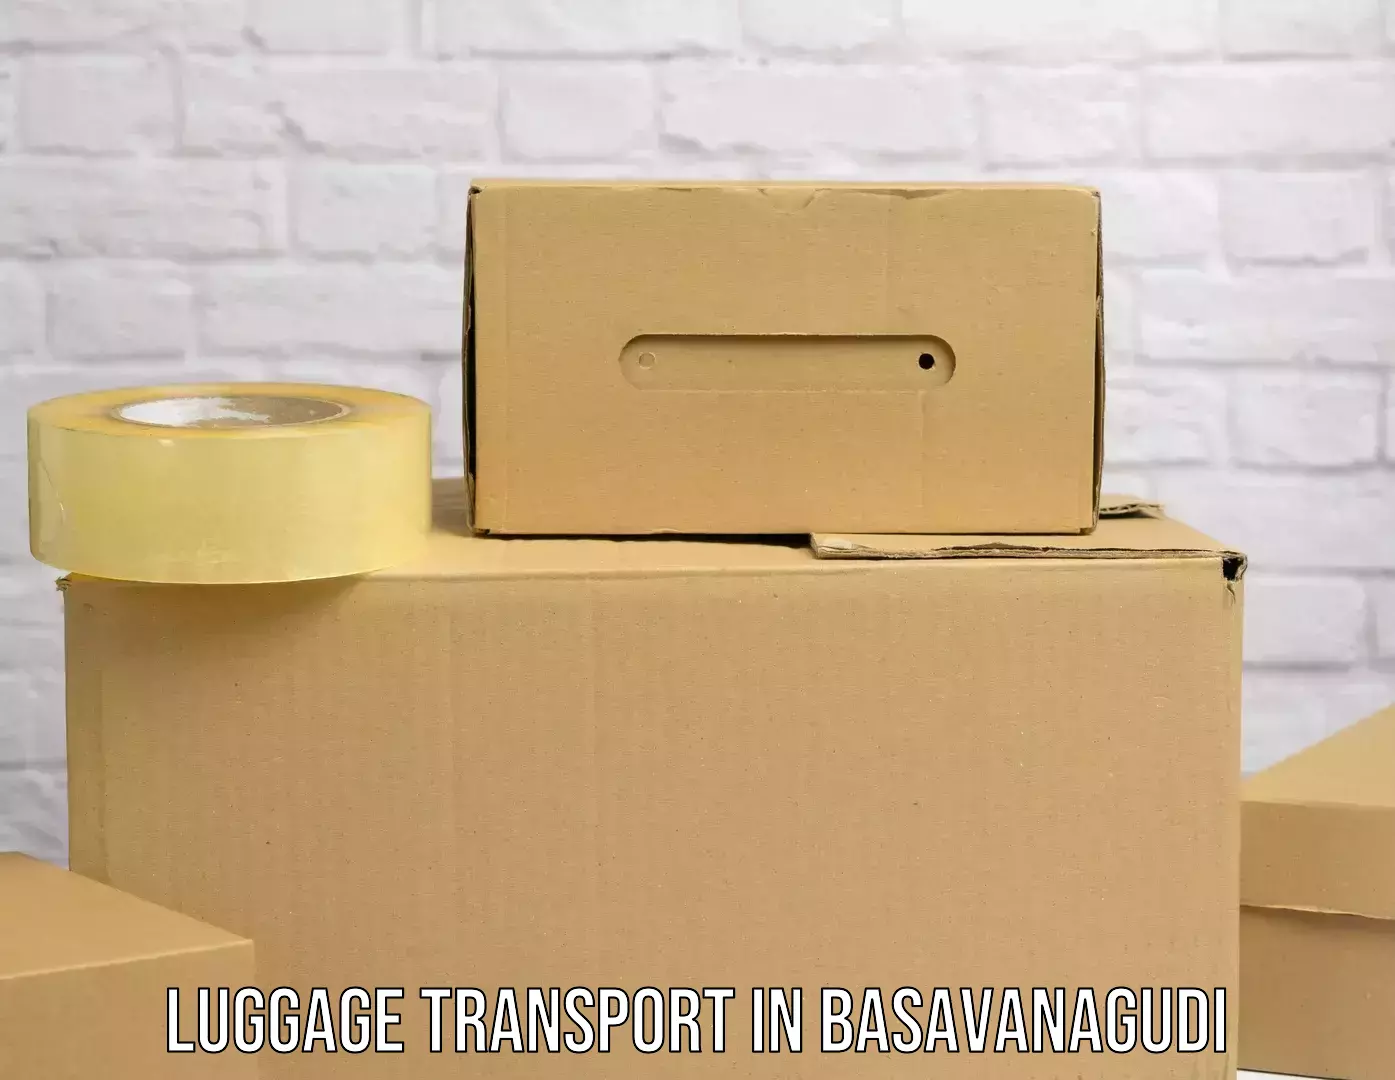 Luggage delivery operations in Basavanagudi